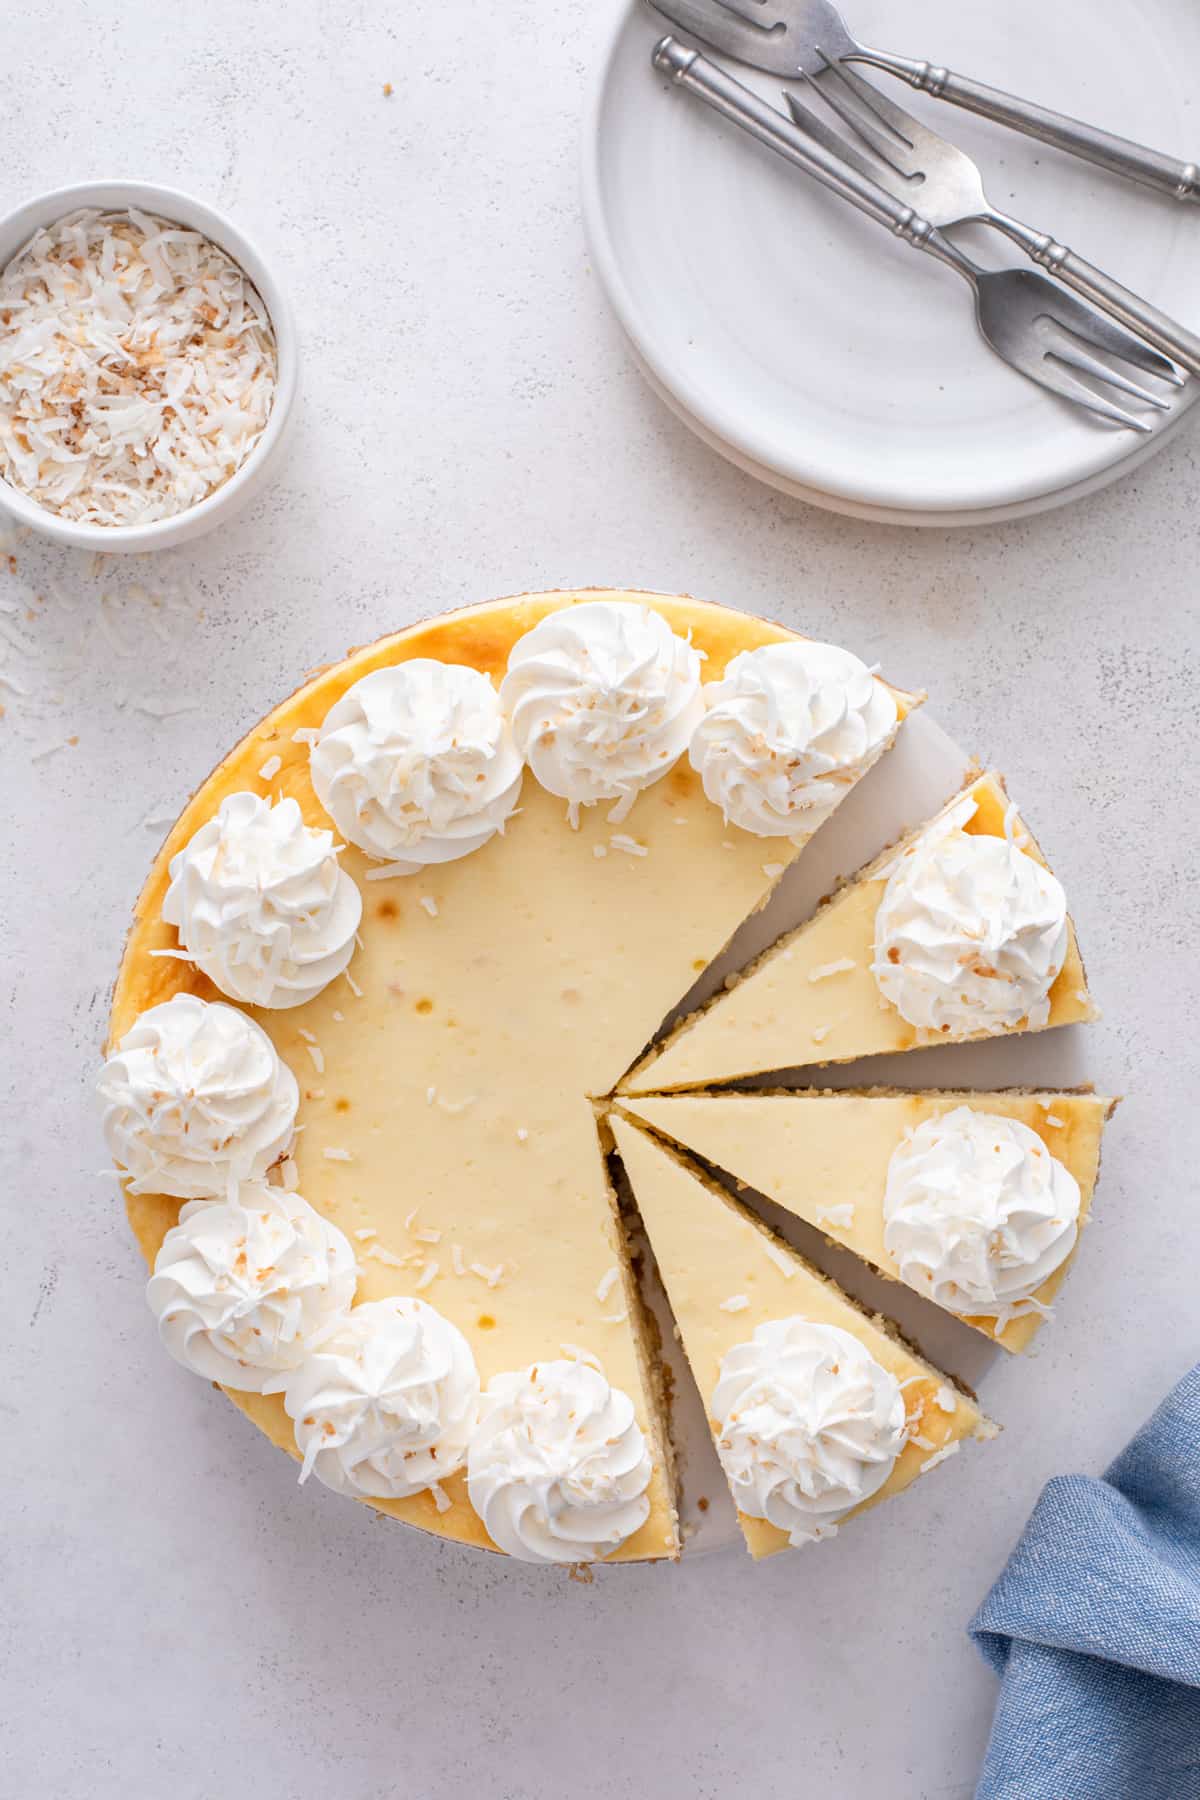 Overhead view of sliced coconut cheesecake garnished with whipped cream.